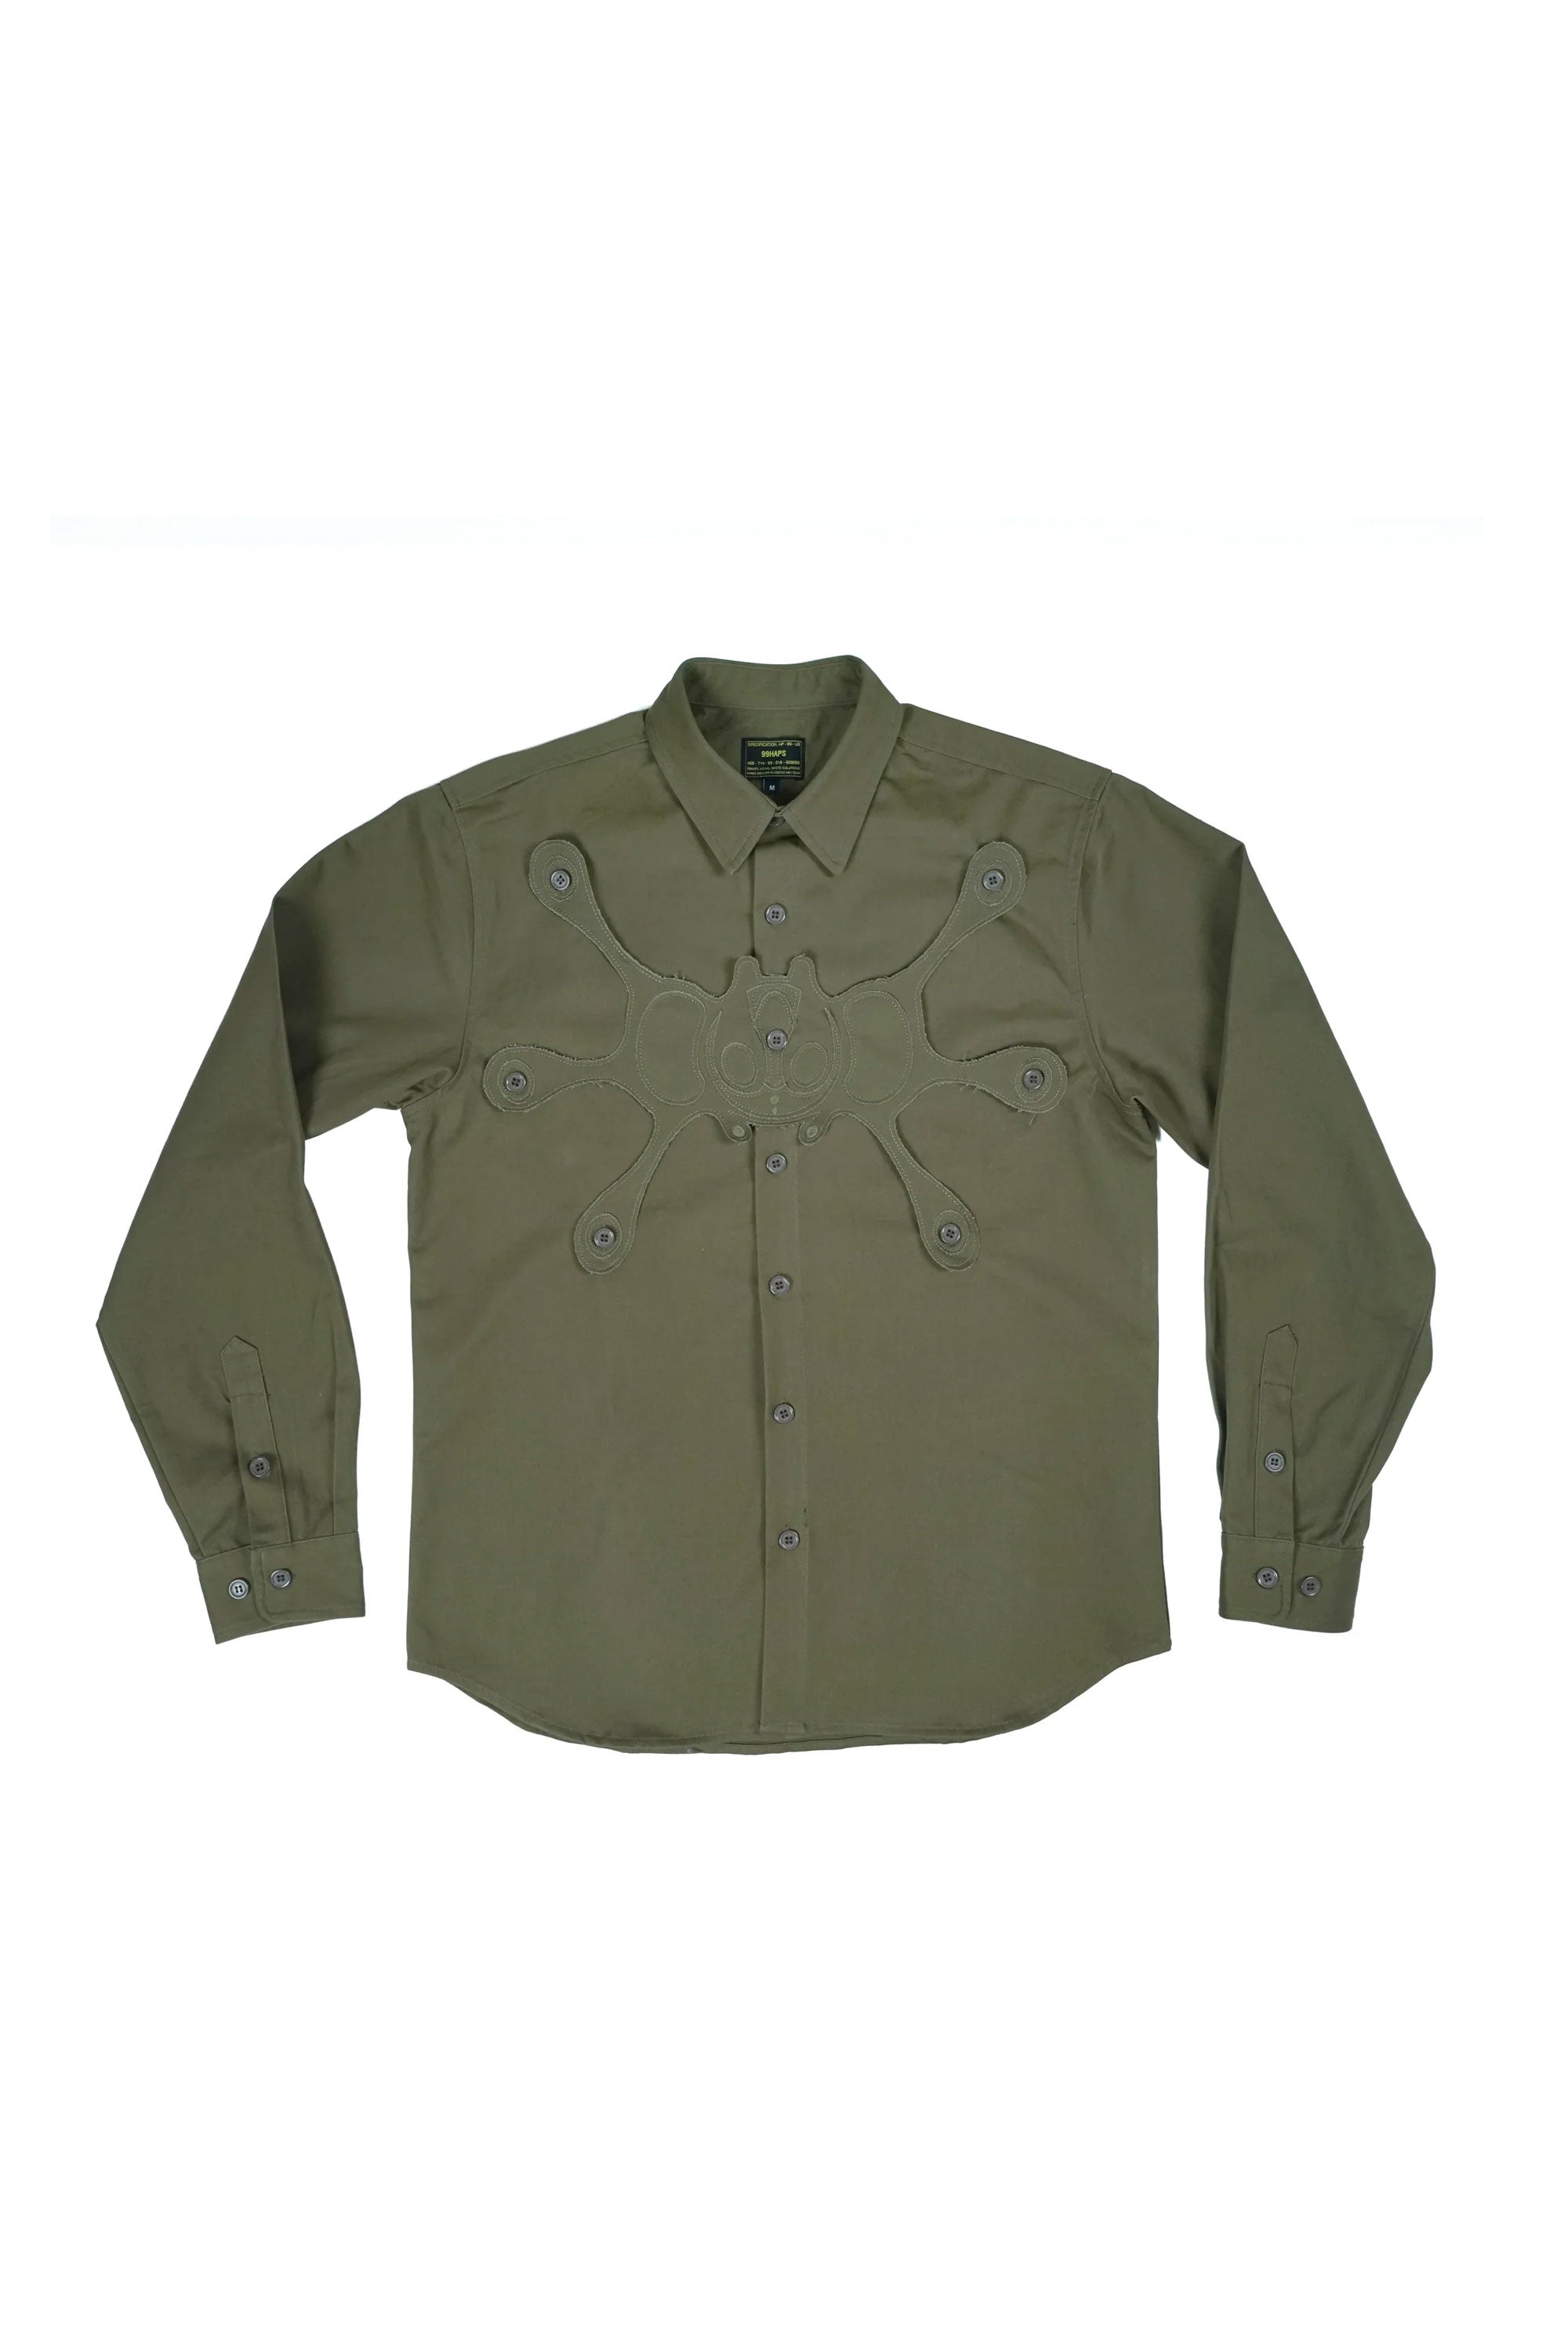 The HAPPY 99 - ANGEL99 BUTTON UP GREEN available online with global shipping, and in PAM Stores Melbourne and Sydney.